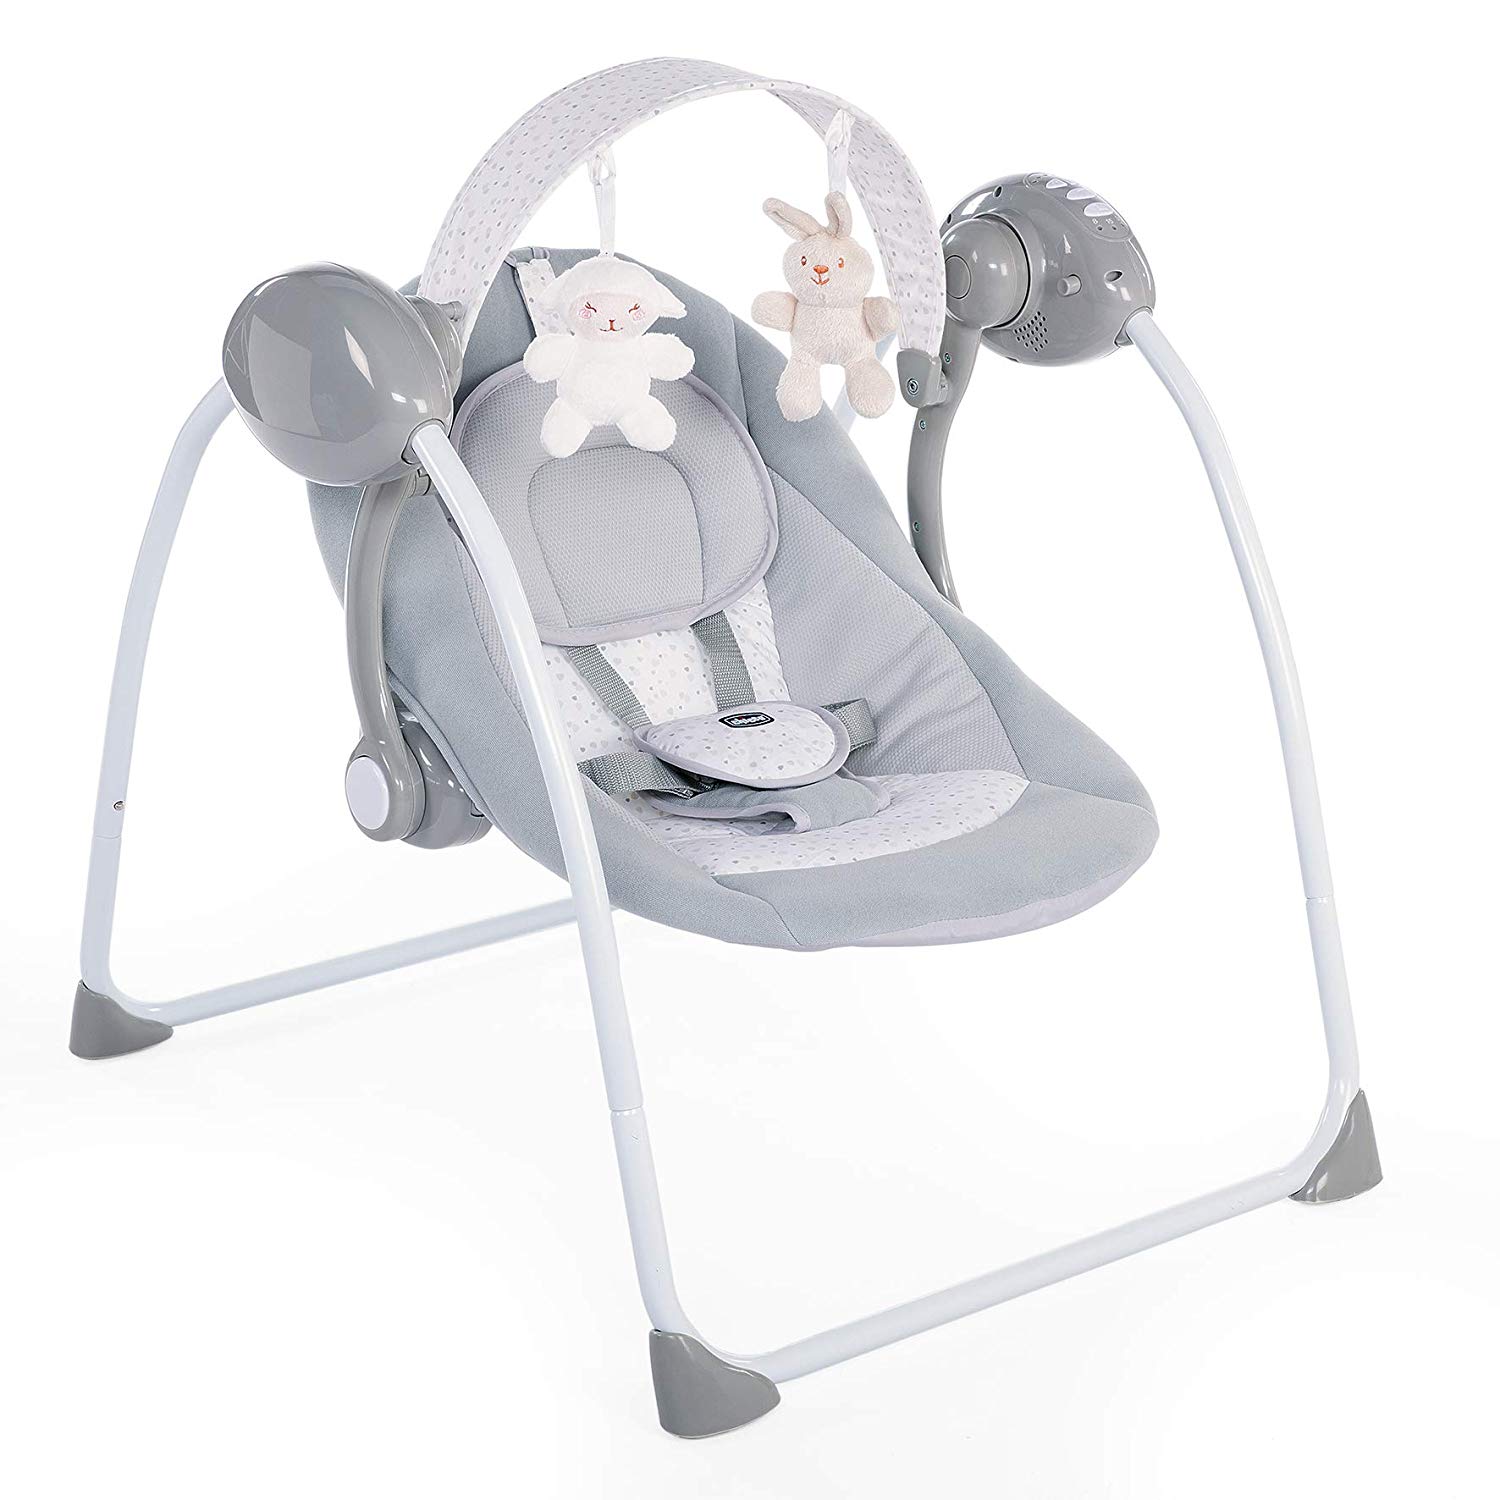 Chicco Relax & Play Electronic Baby Rocker from 0 Months to 9 kg, Adjustable Rocker and Baby Swing with 5 Speeds, Play Arch with 12 Melodies and 2 Plush Toys, Compact Closure, Grey